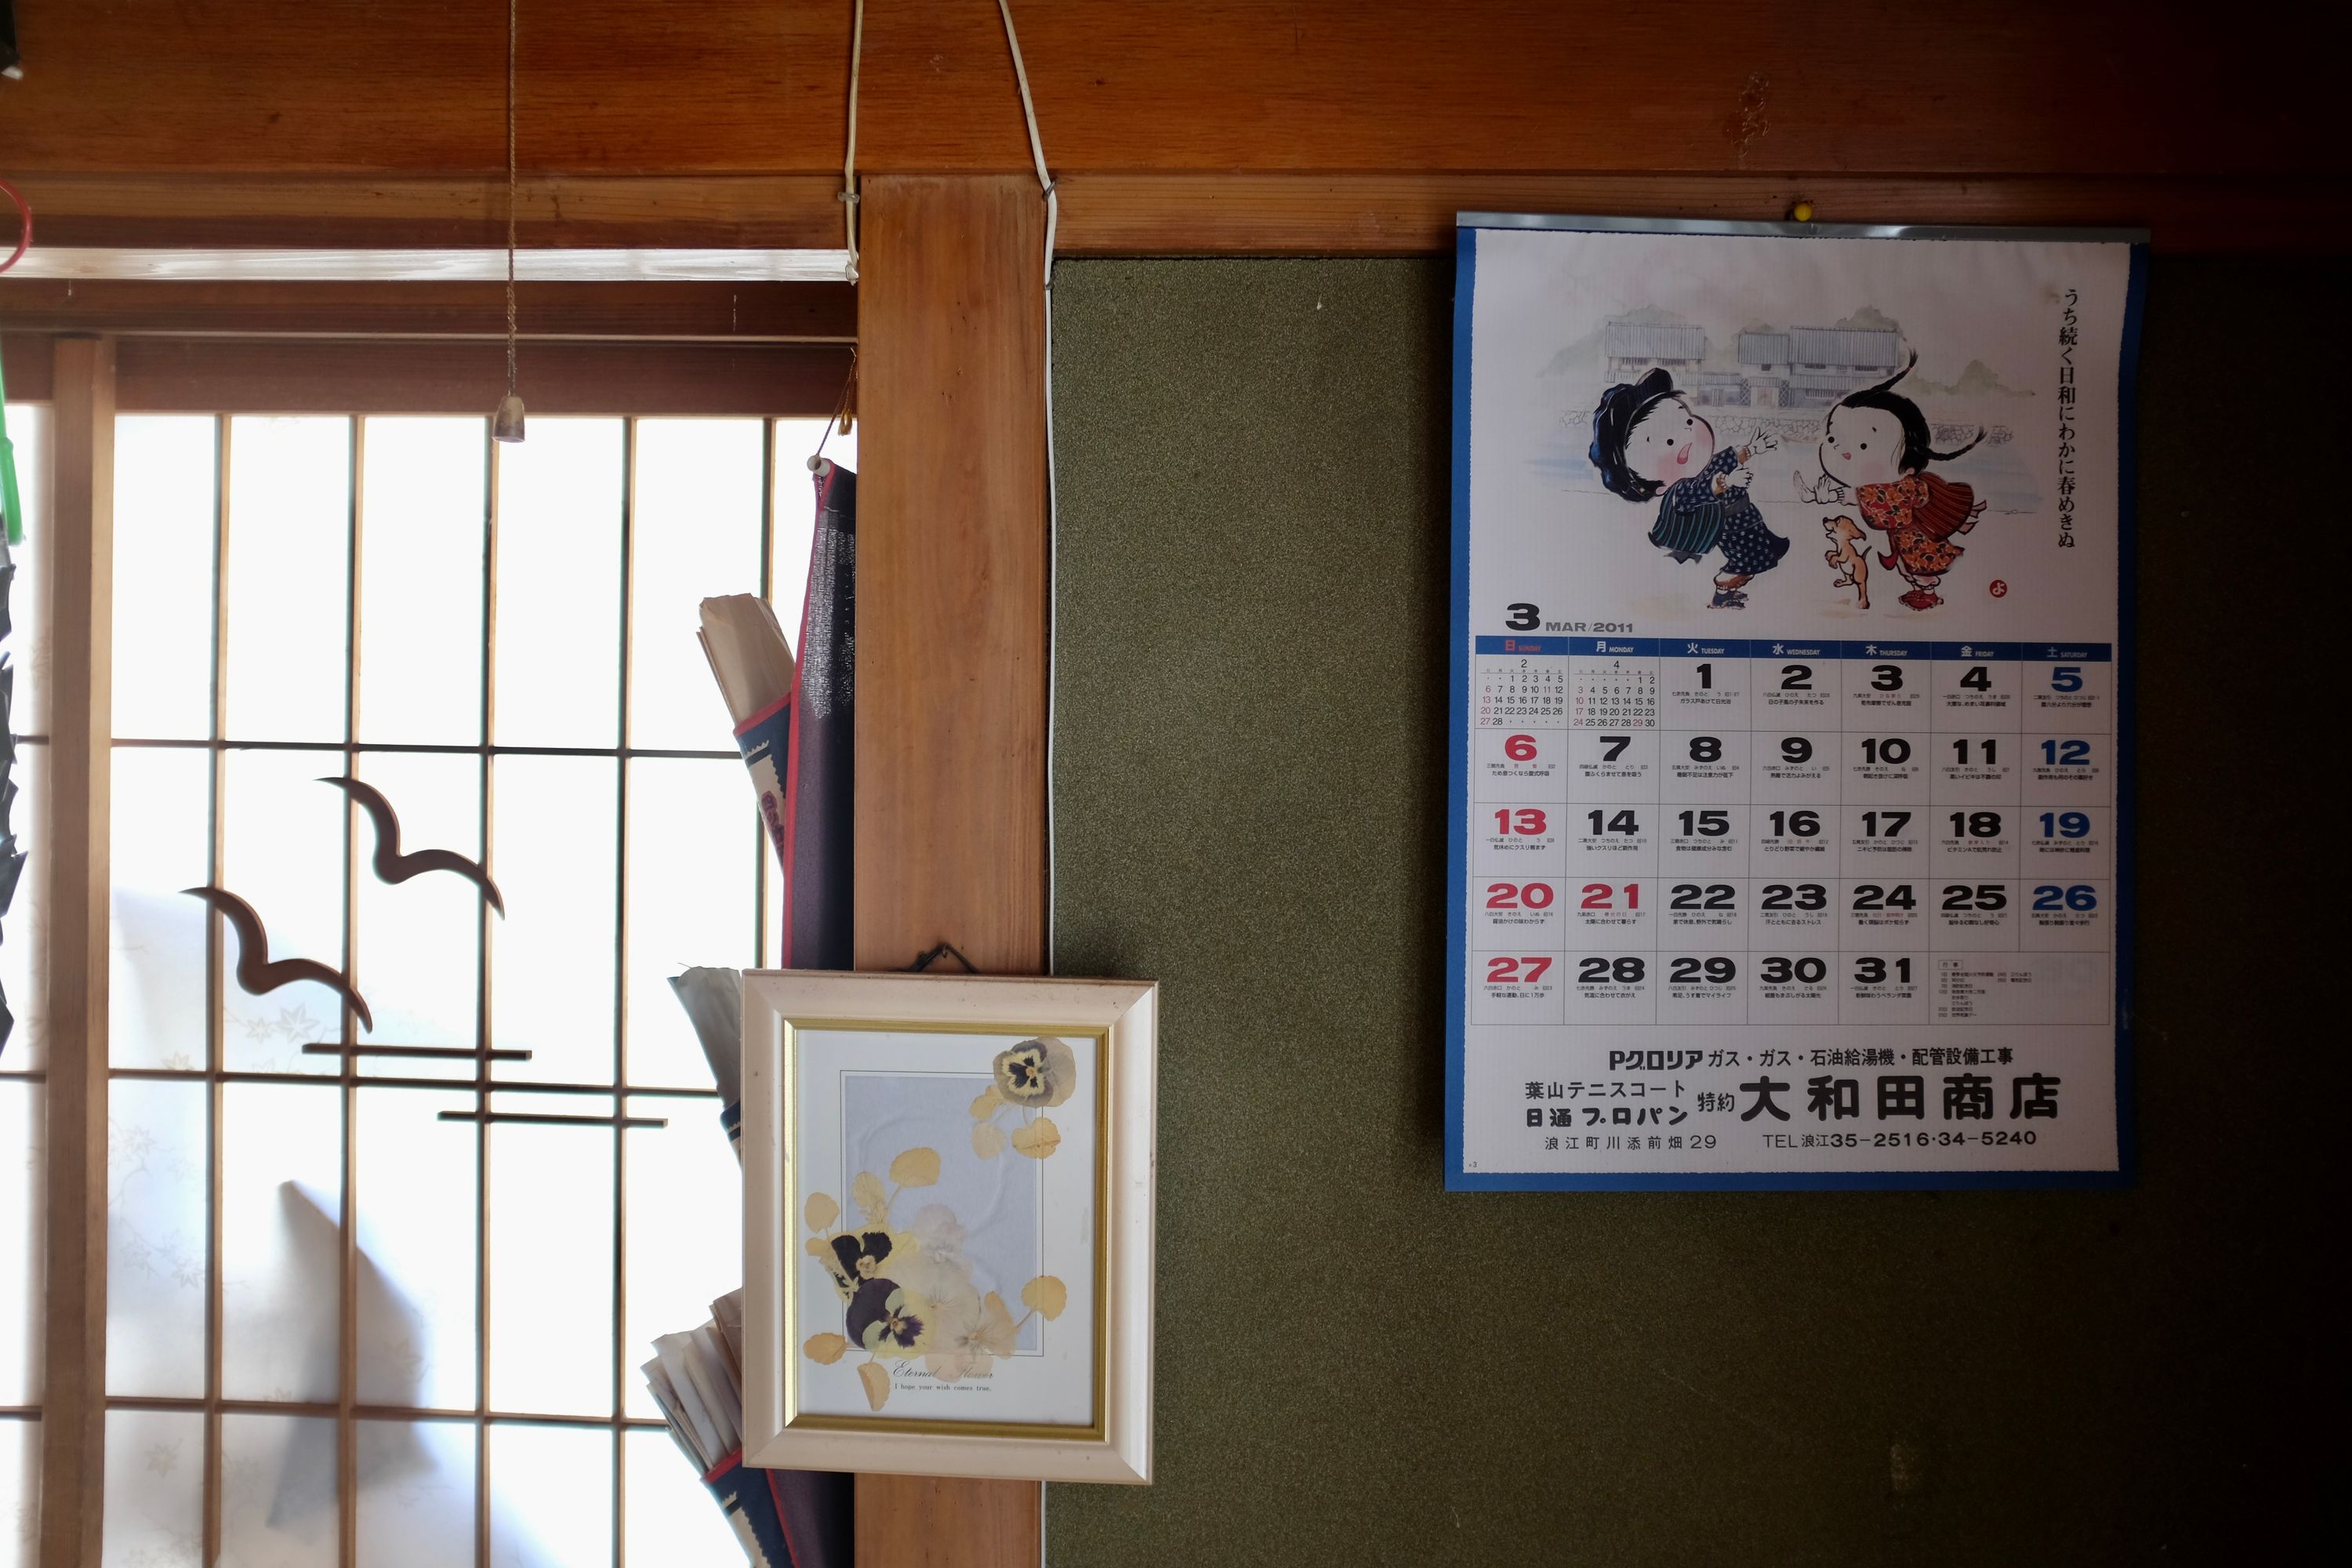 A calendar showing March 2011, the month of the earthquake, more than six years out of date.